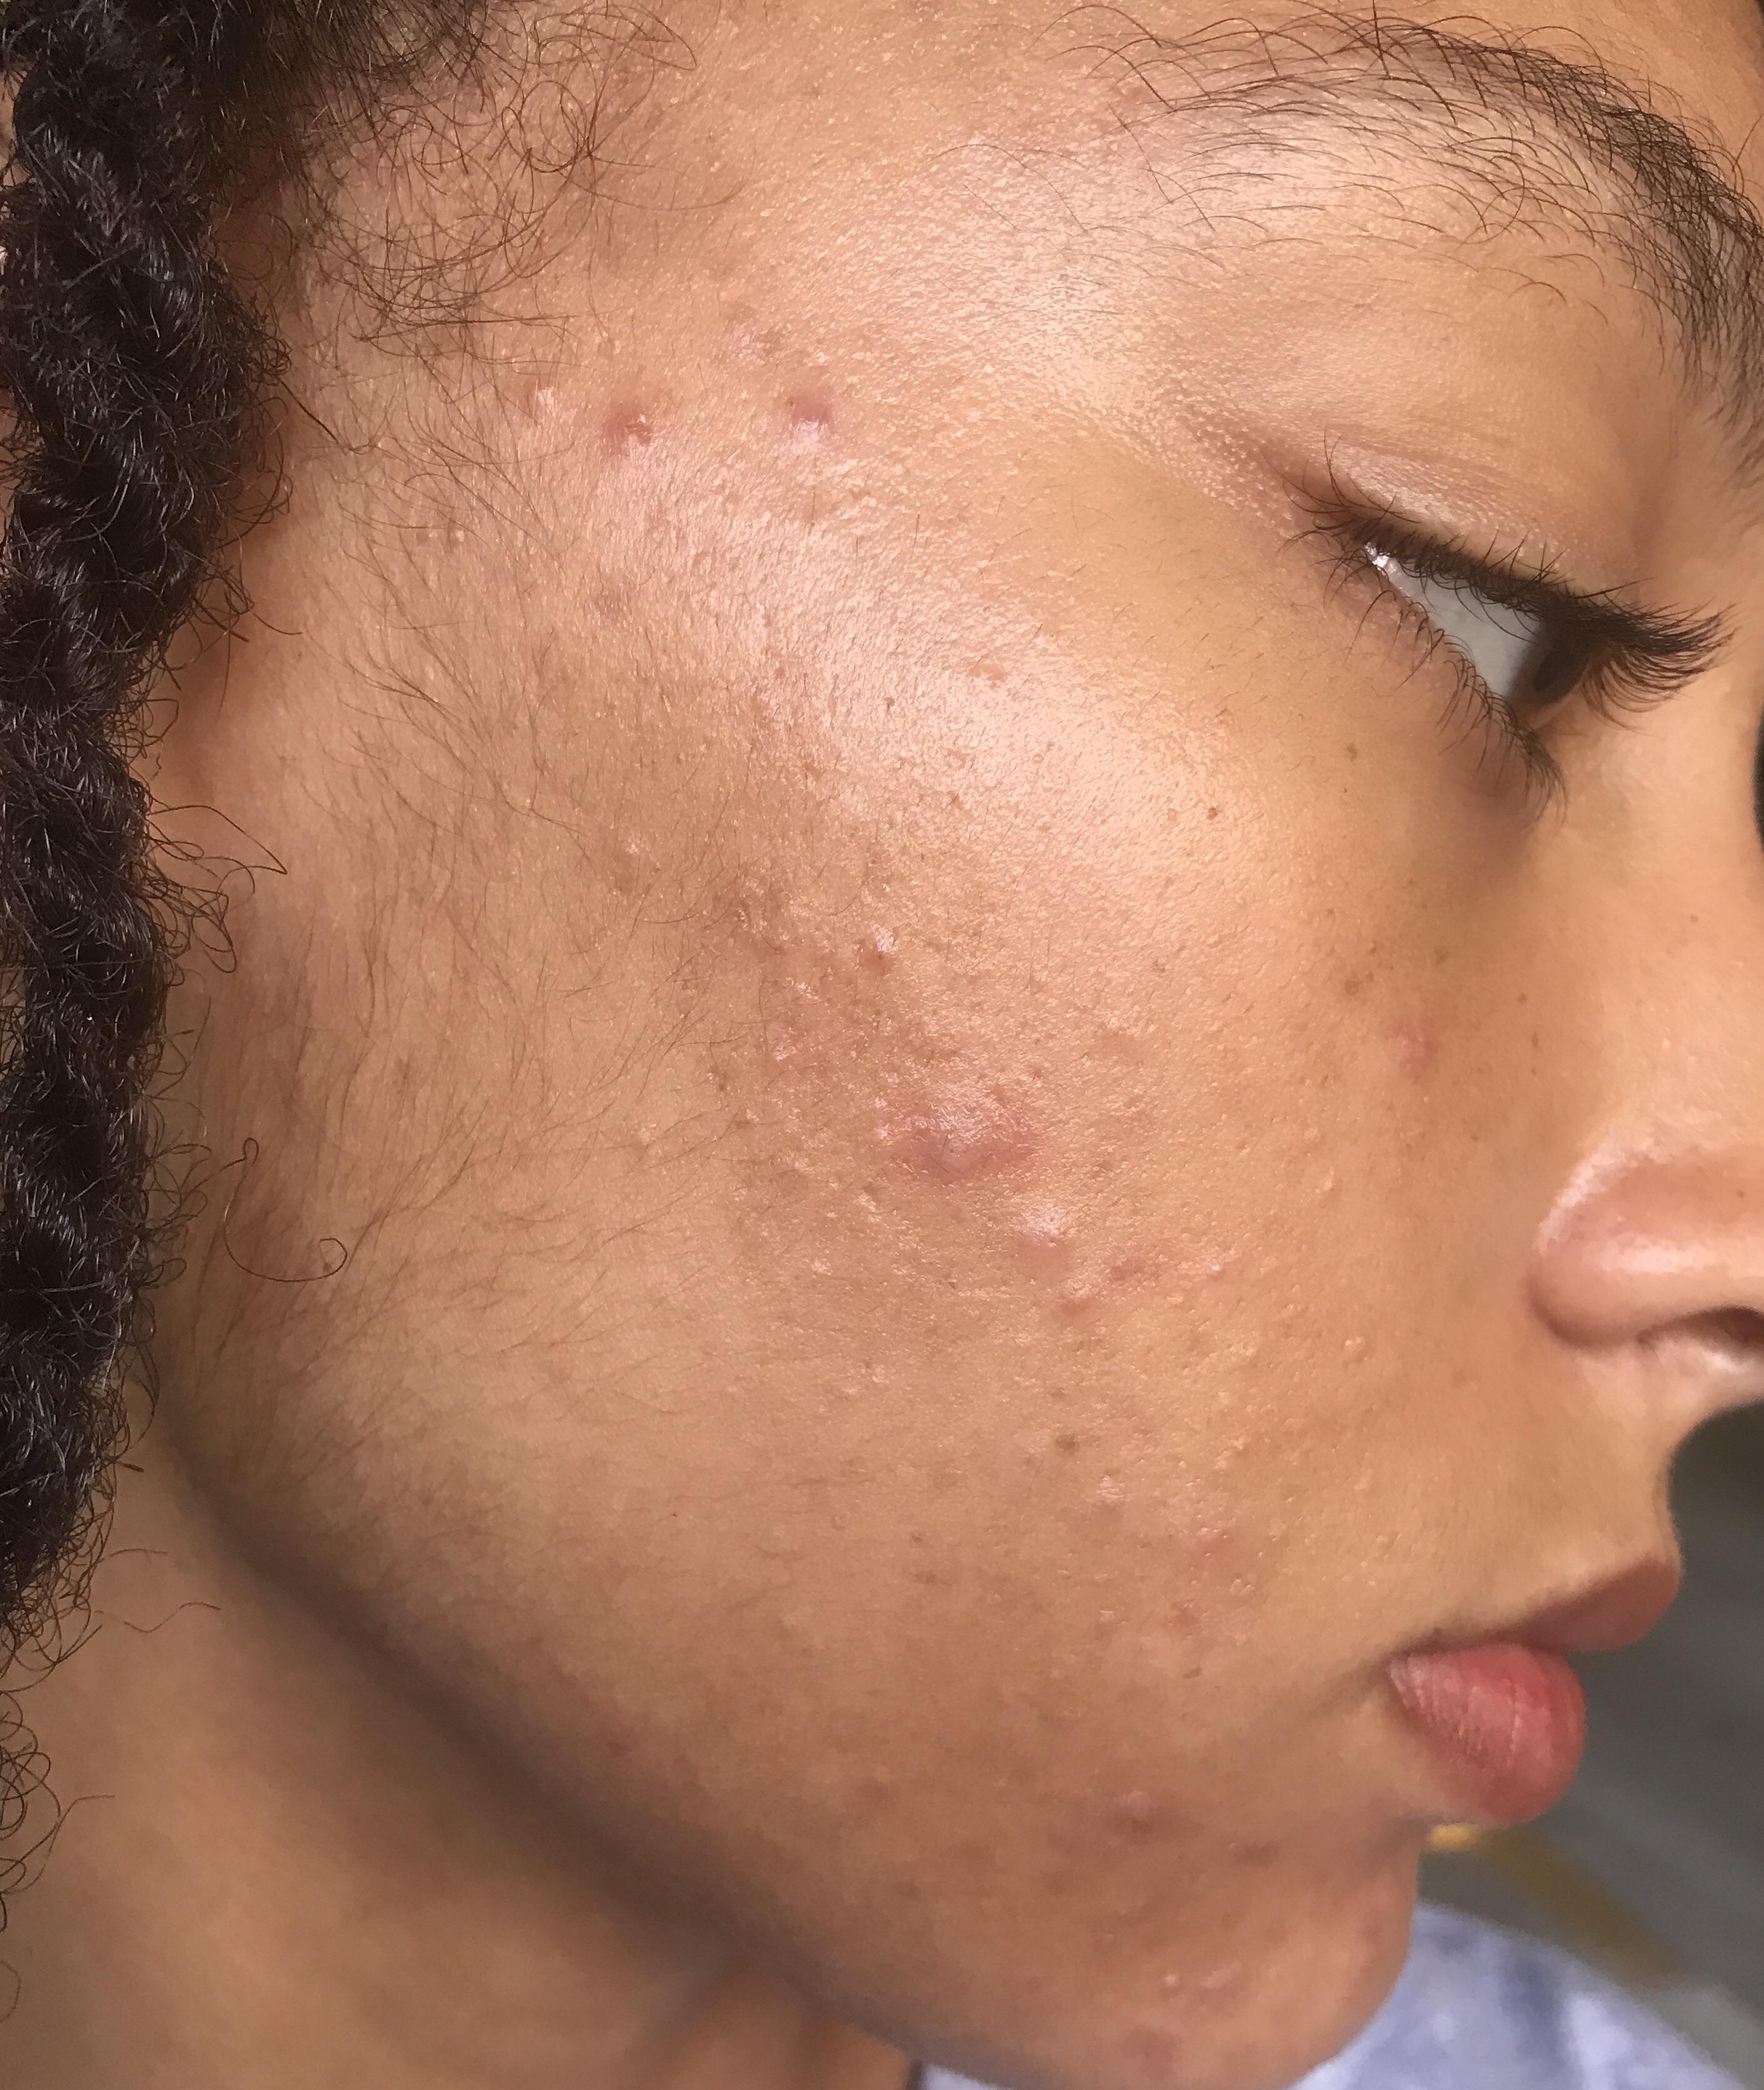 How To Get Rid Of Acne Breakouts A Complete Guide To Clear Skin Neutriherbs Nigeria photo